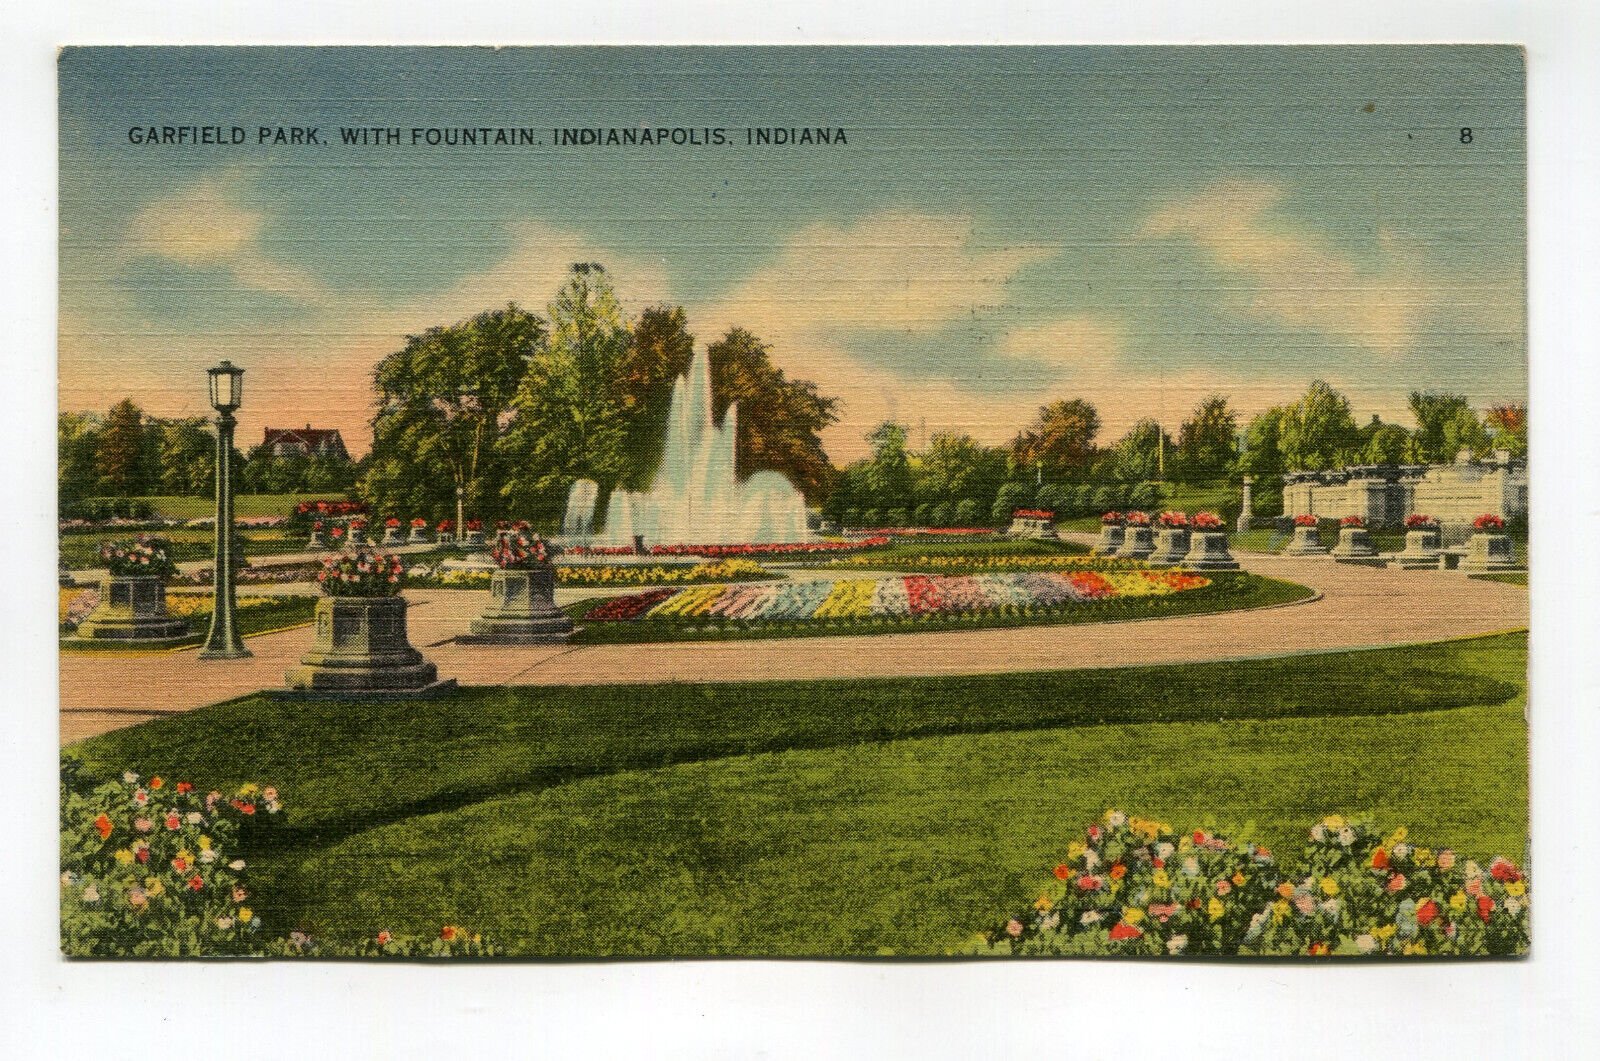 GARFIELD PARK WITH FOUNTAIN INDIANAPOLIS INDIANA